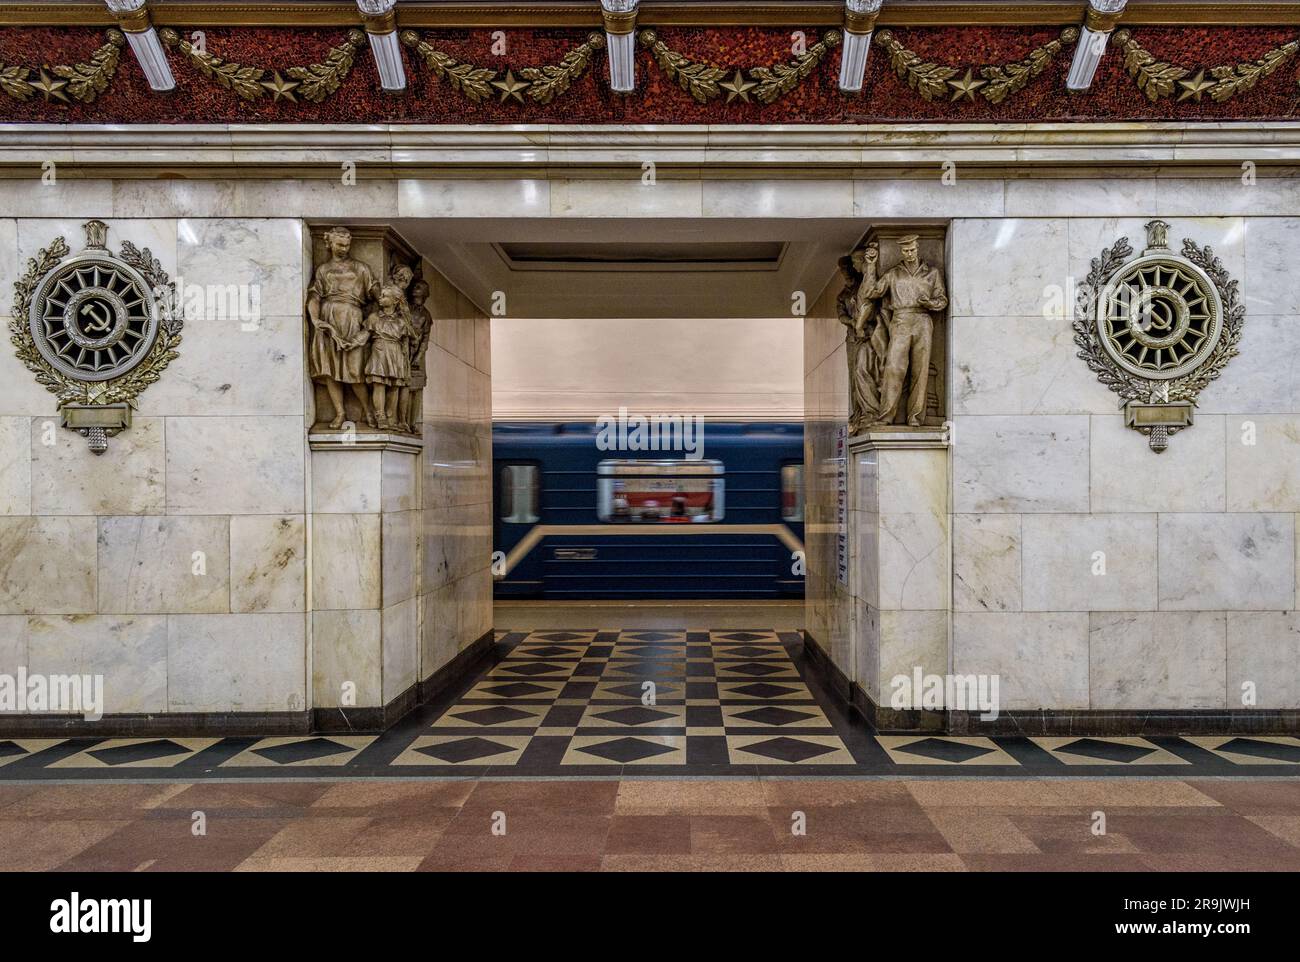 Narvskaya subway station in the city, built in the neoclassical style lined in white marble with many bronze inserts and a decorative frieze, a train Stock Photo